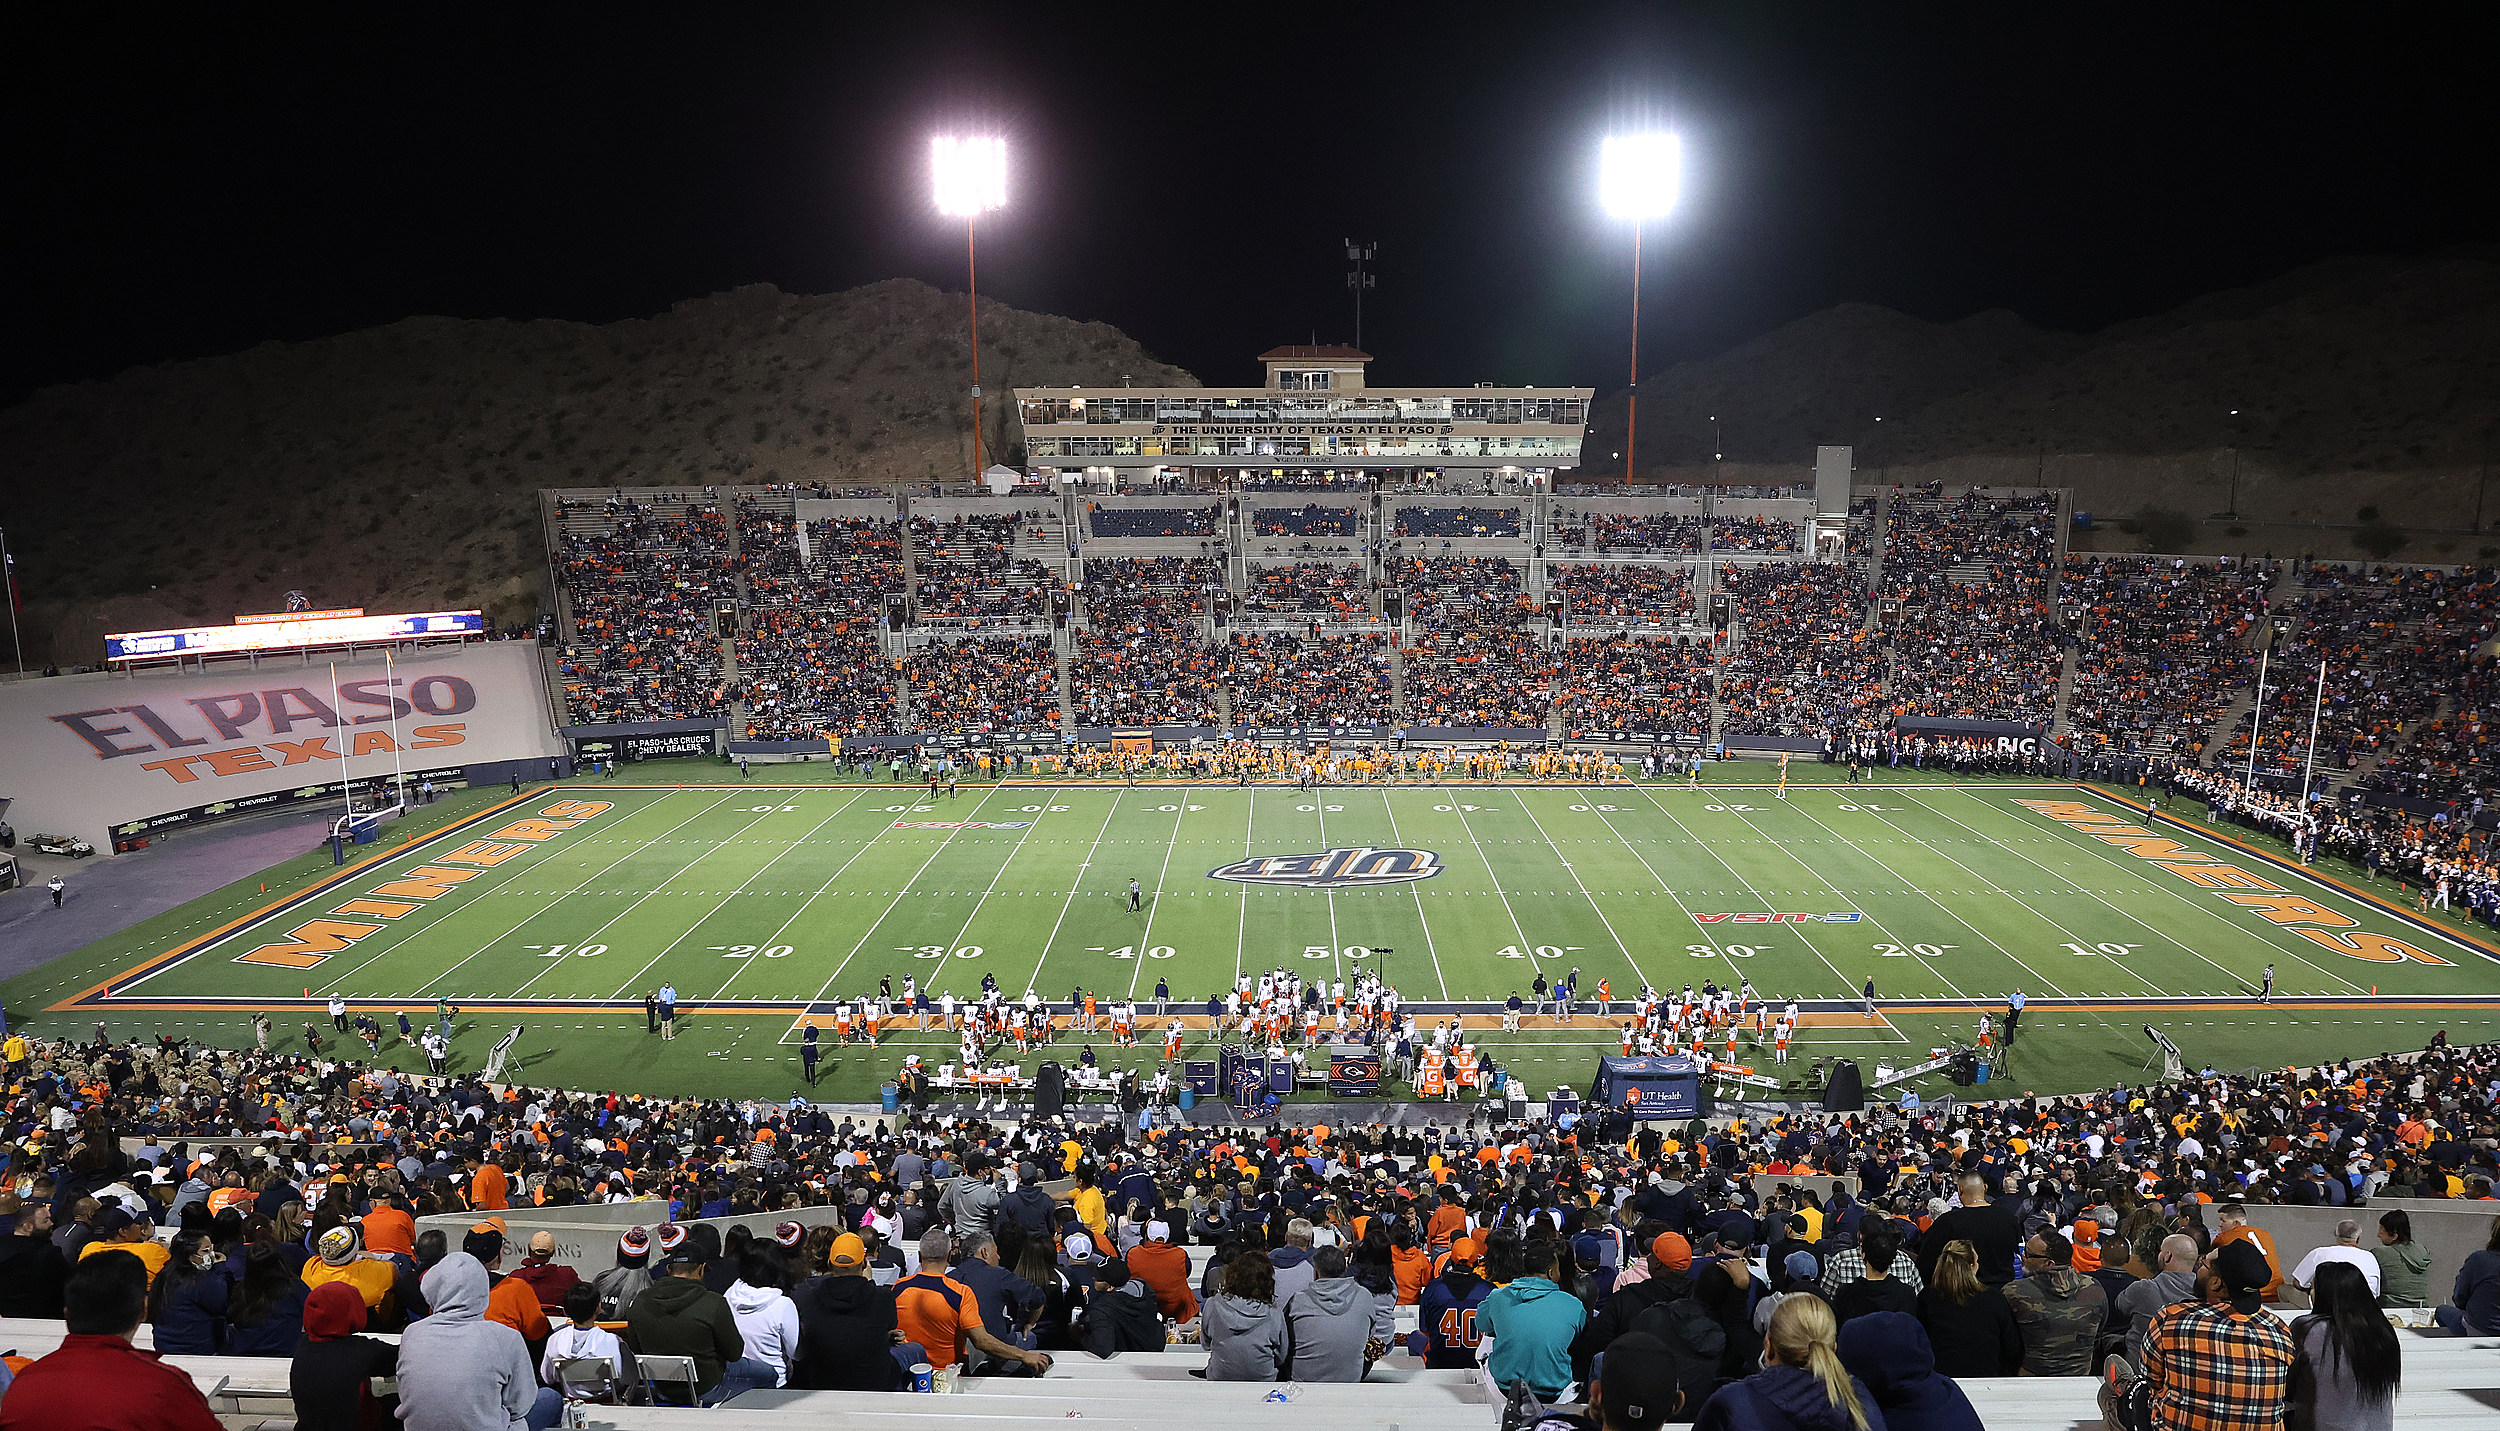 ESPN's Pat McAfee Gives UTEP Kicker Praise After UTEP-FIU Game